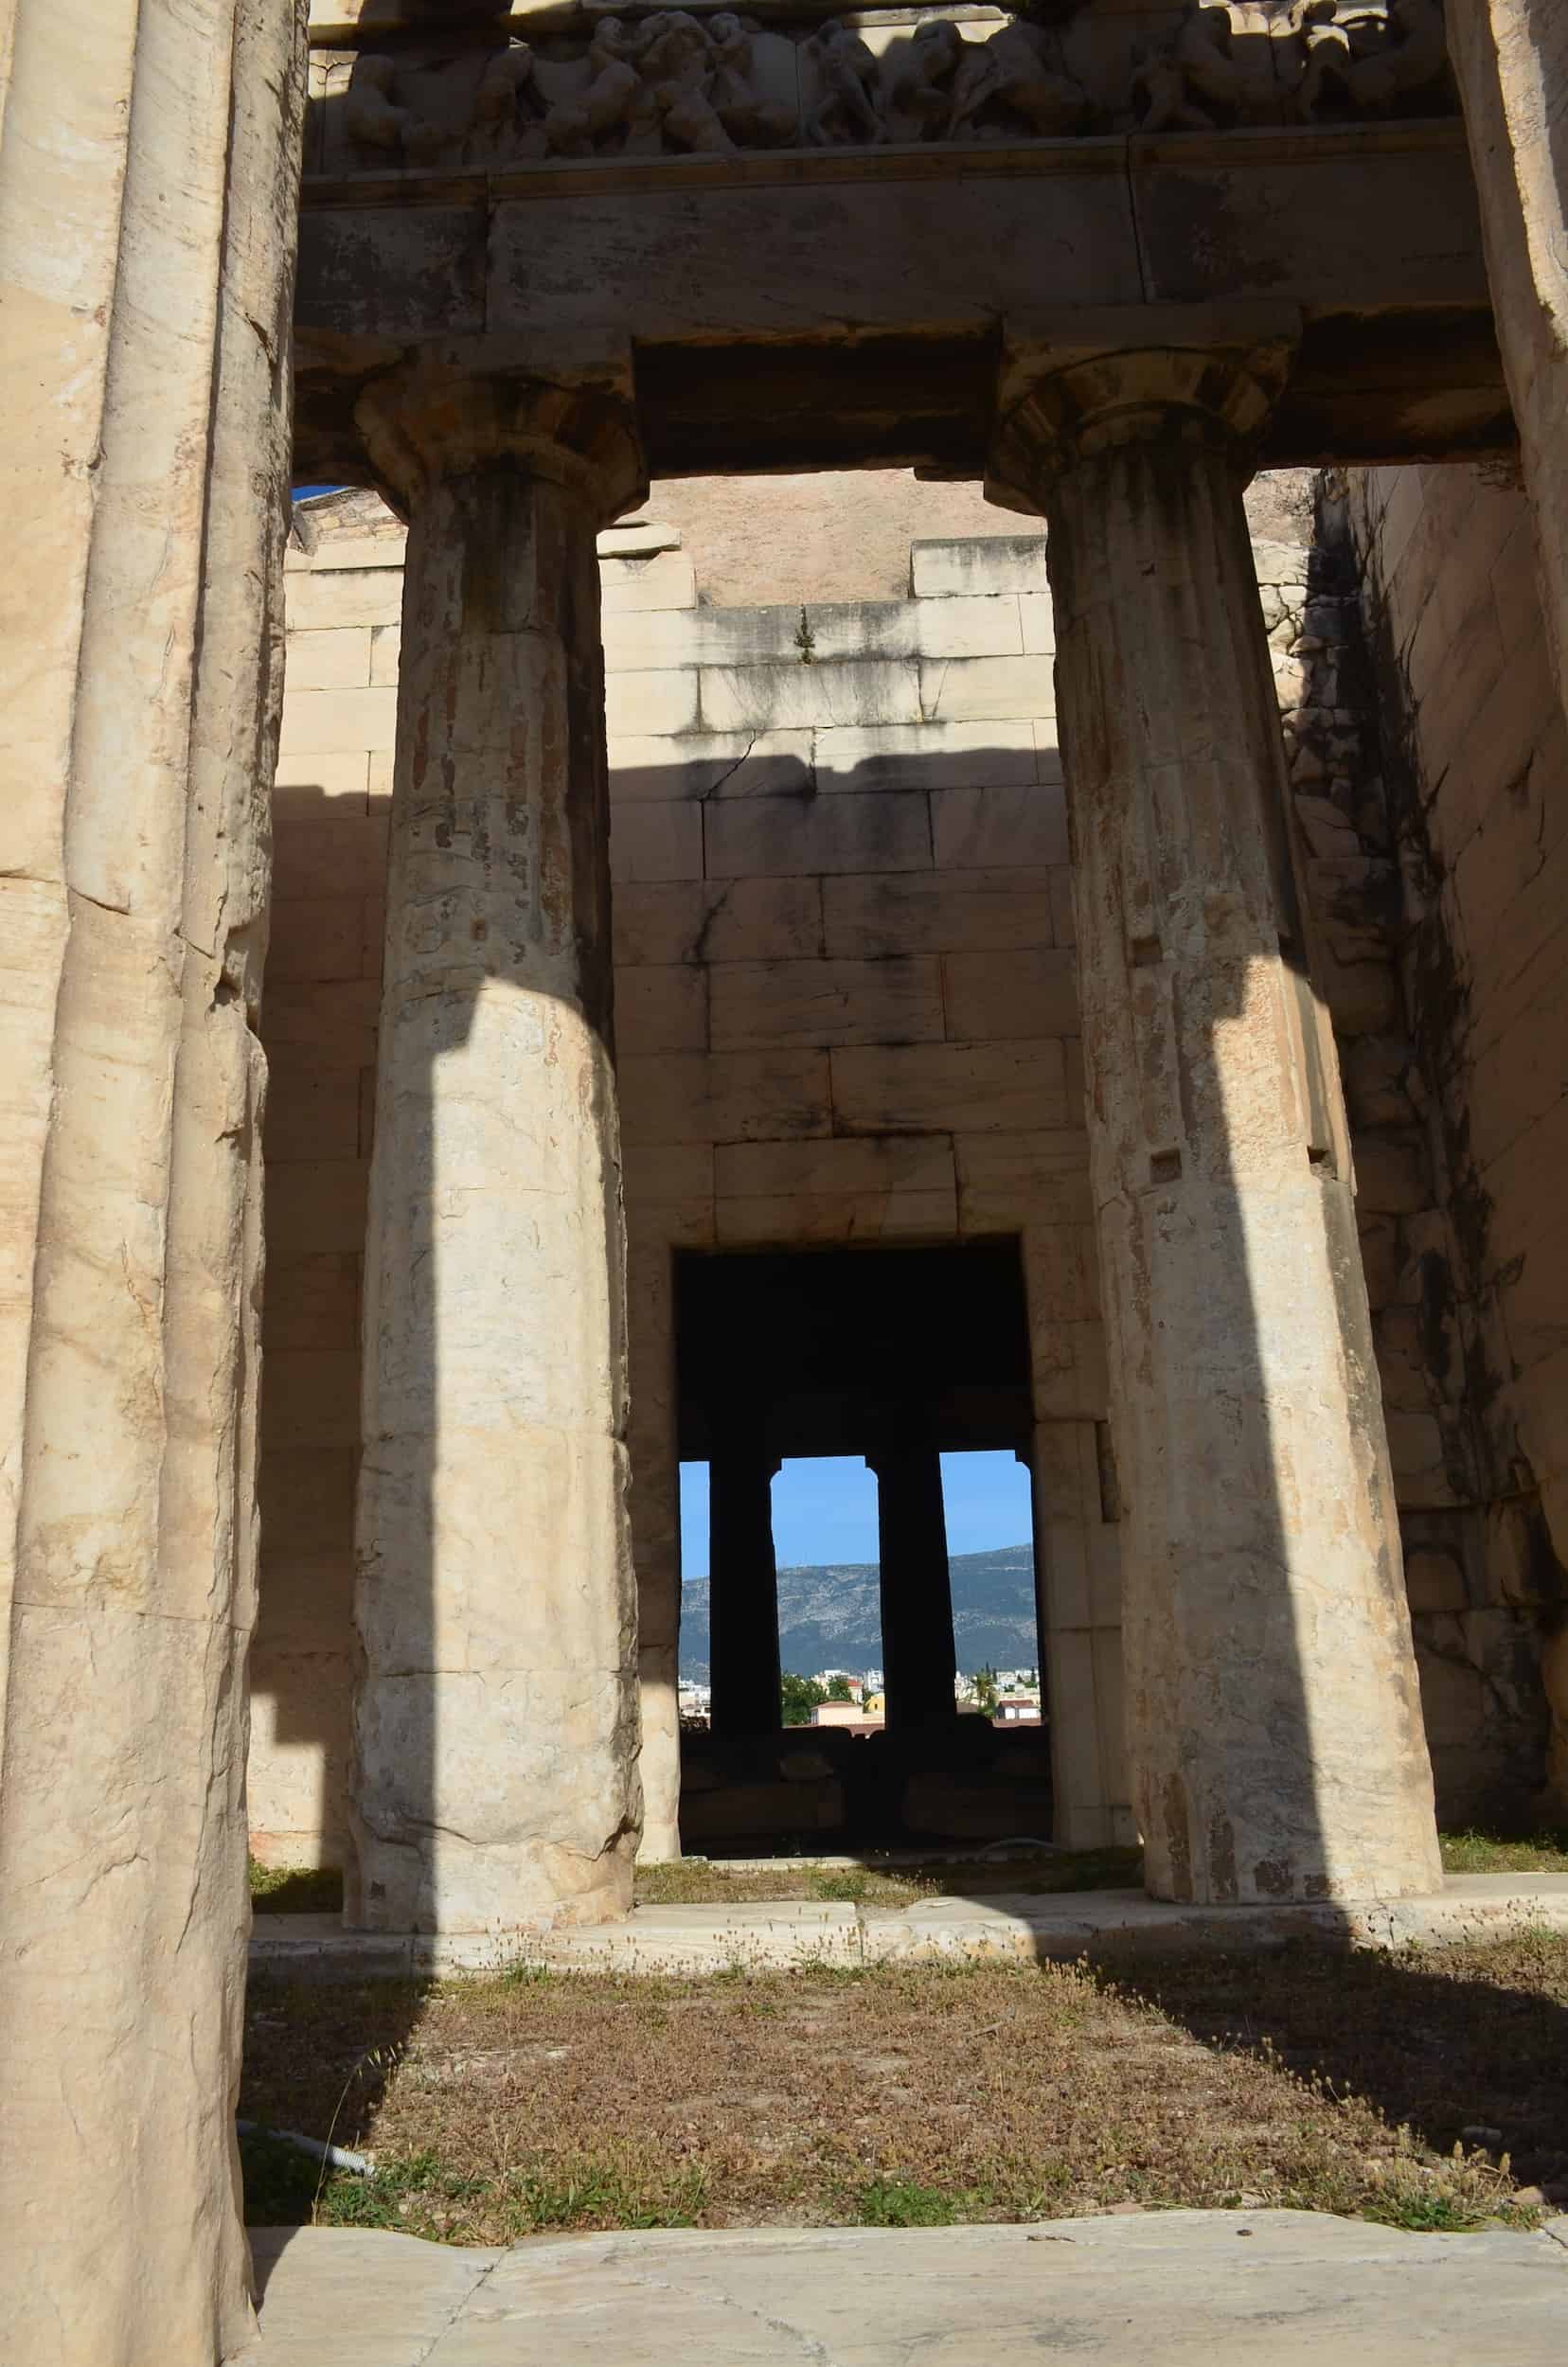 Columns in front of the opisthodomos of the Temple of Hephaestus